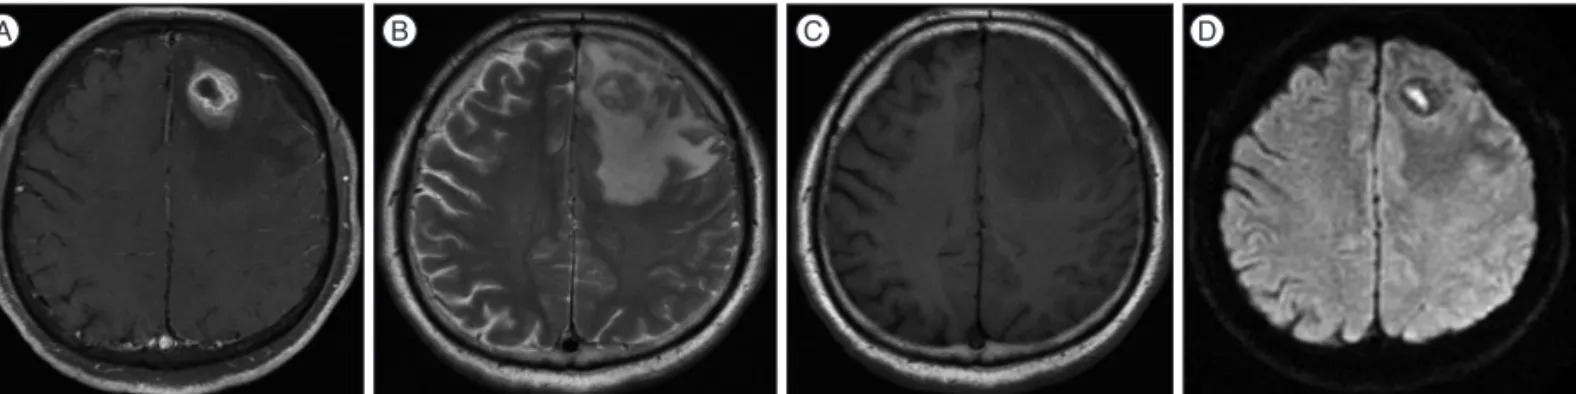 Fig. 1. Brain magnetic resonance imaging (MRI) shows heterogenous enhancing nodular lesion in left frontal lobe with adjacent edema (A)